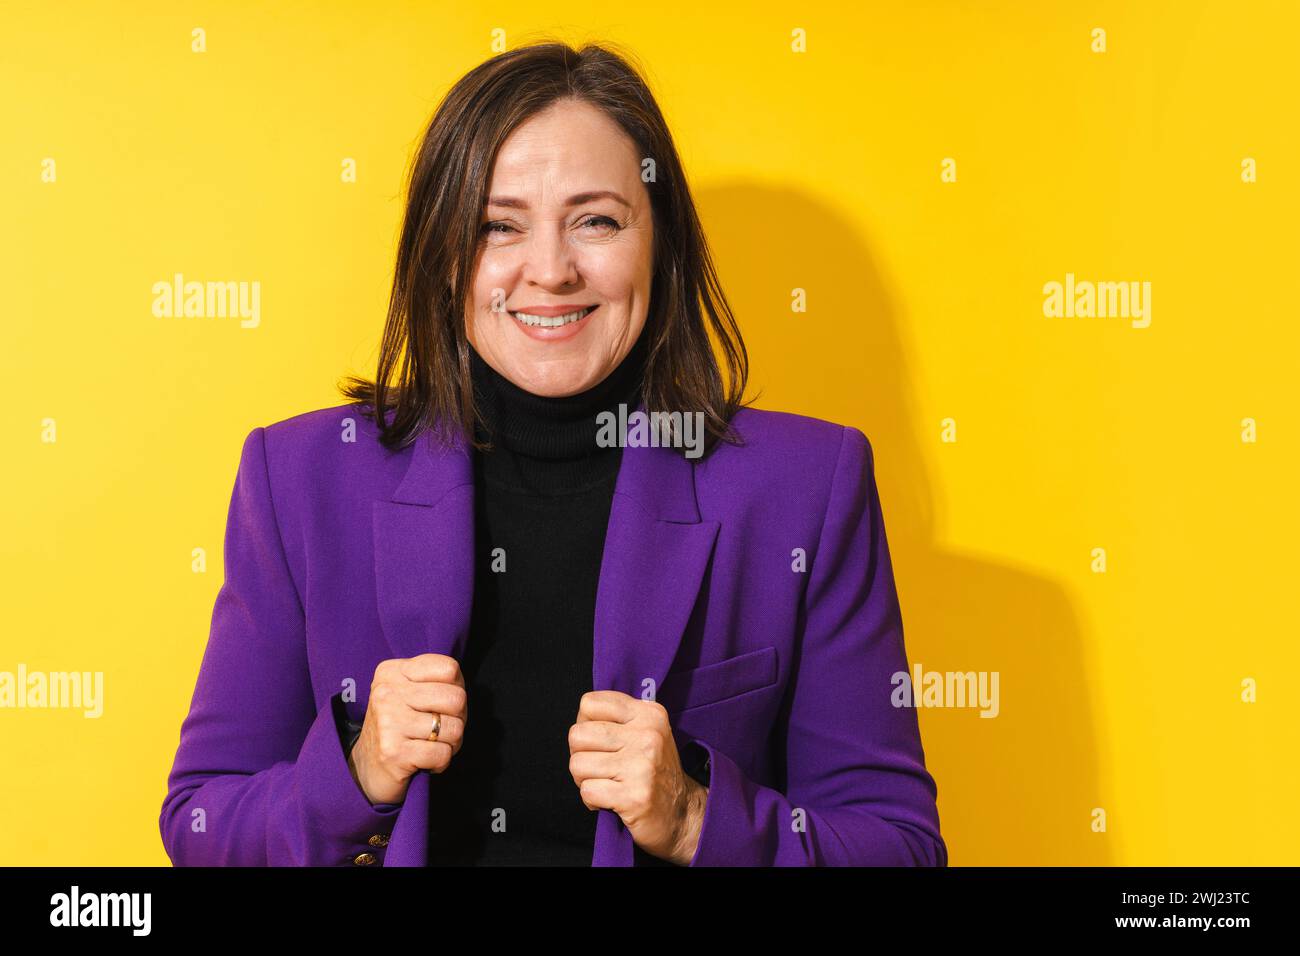 Cheerful middle aged woman wearing purple blazer smiling against yellow background Stock Photo